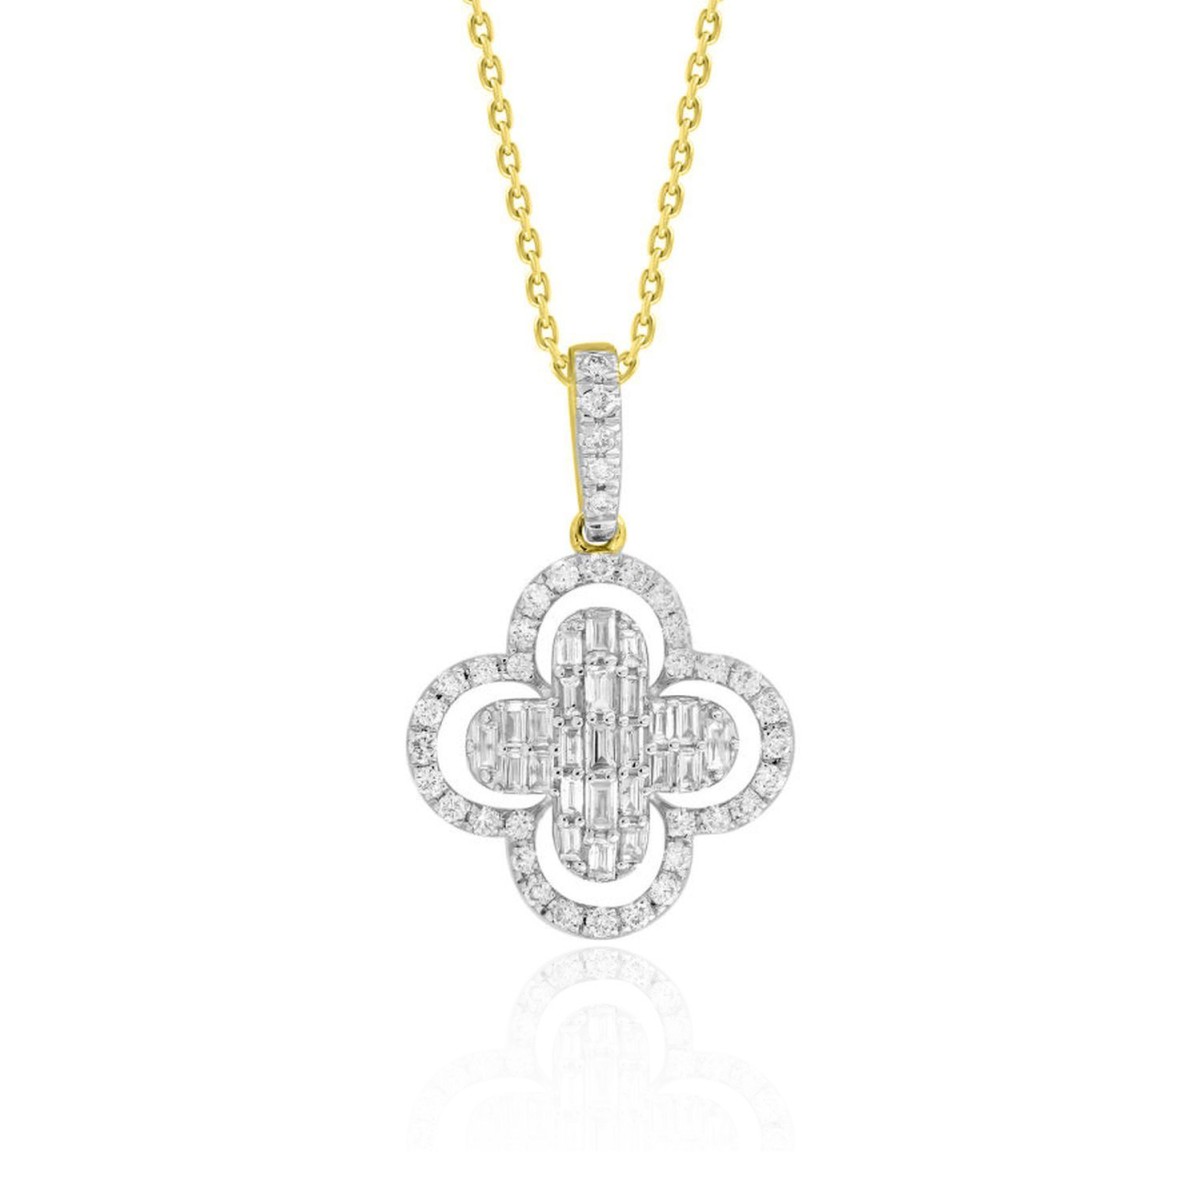 14K YELLOW GOLD 3/8CT ROUND/BAGUETTE DIAMOND LADIES PENDANT WITH CHAIN 